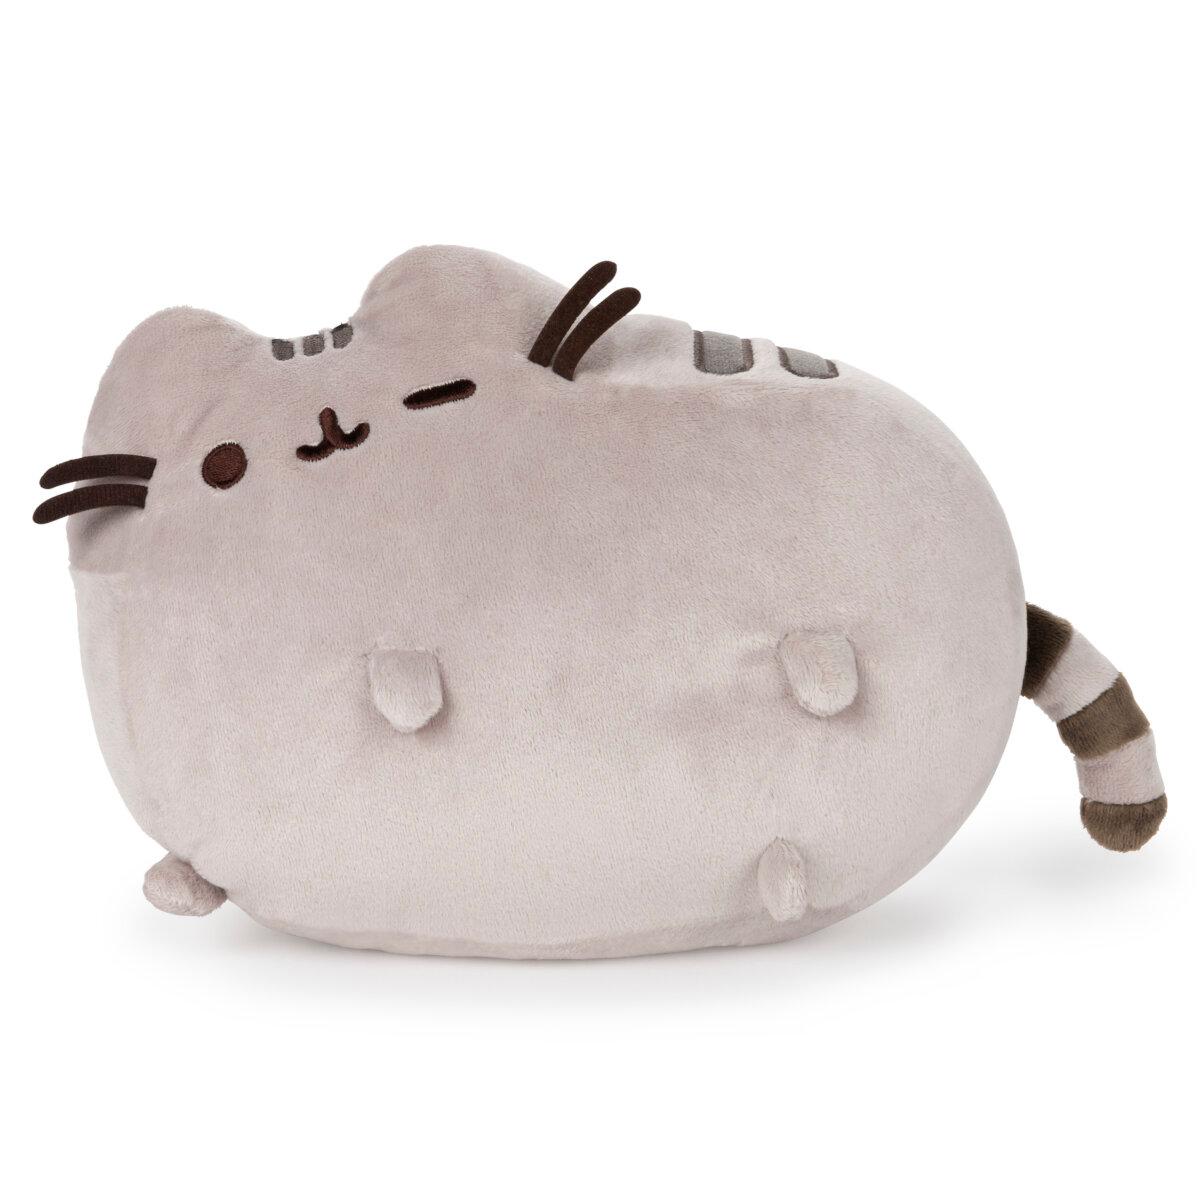 PUSHEEN BOOKS A MILLION EXCLUSIVE STUFFED ANIMAL PLUSH WITH KEYBOARD 10" TOY 